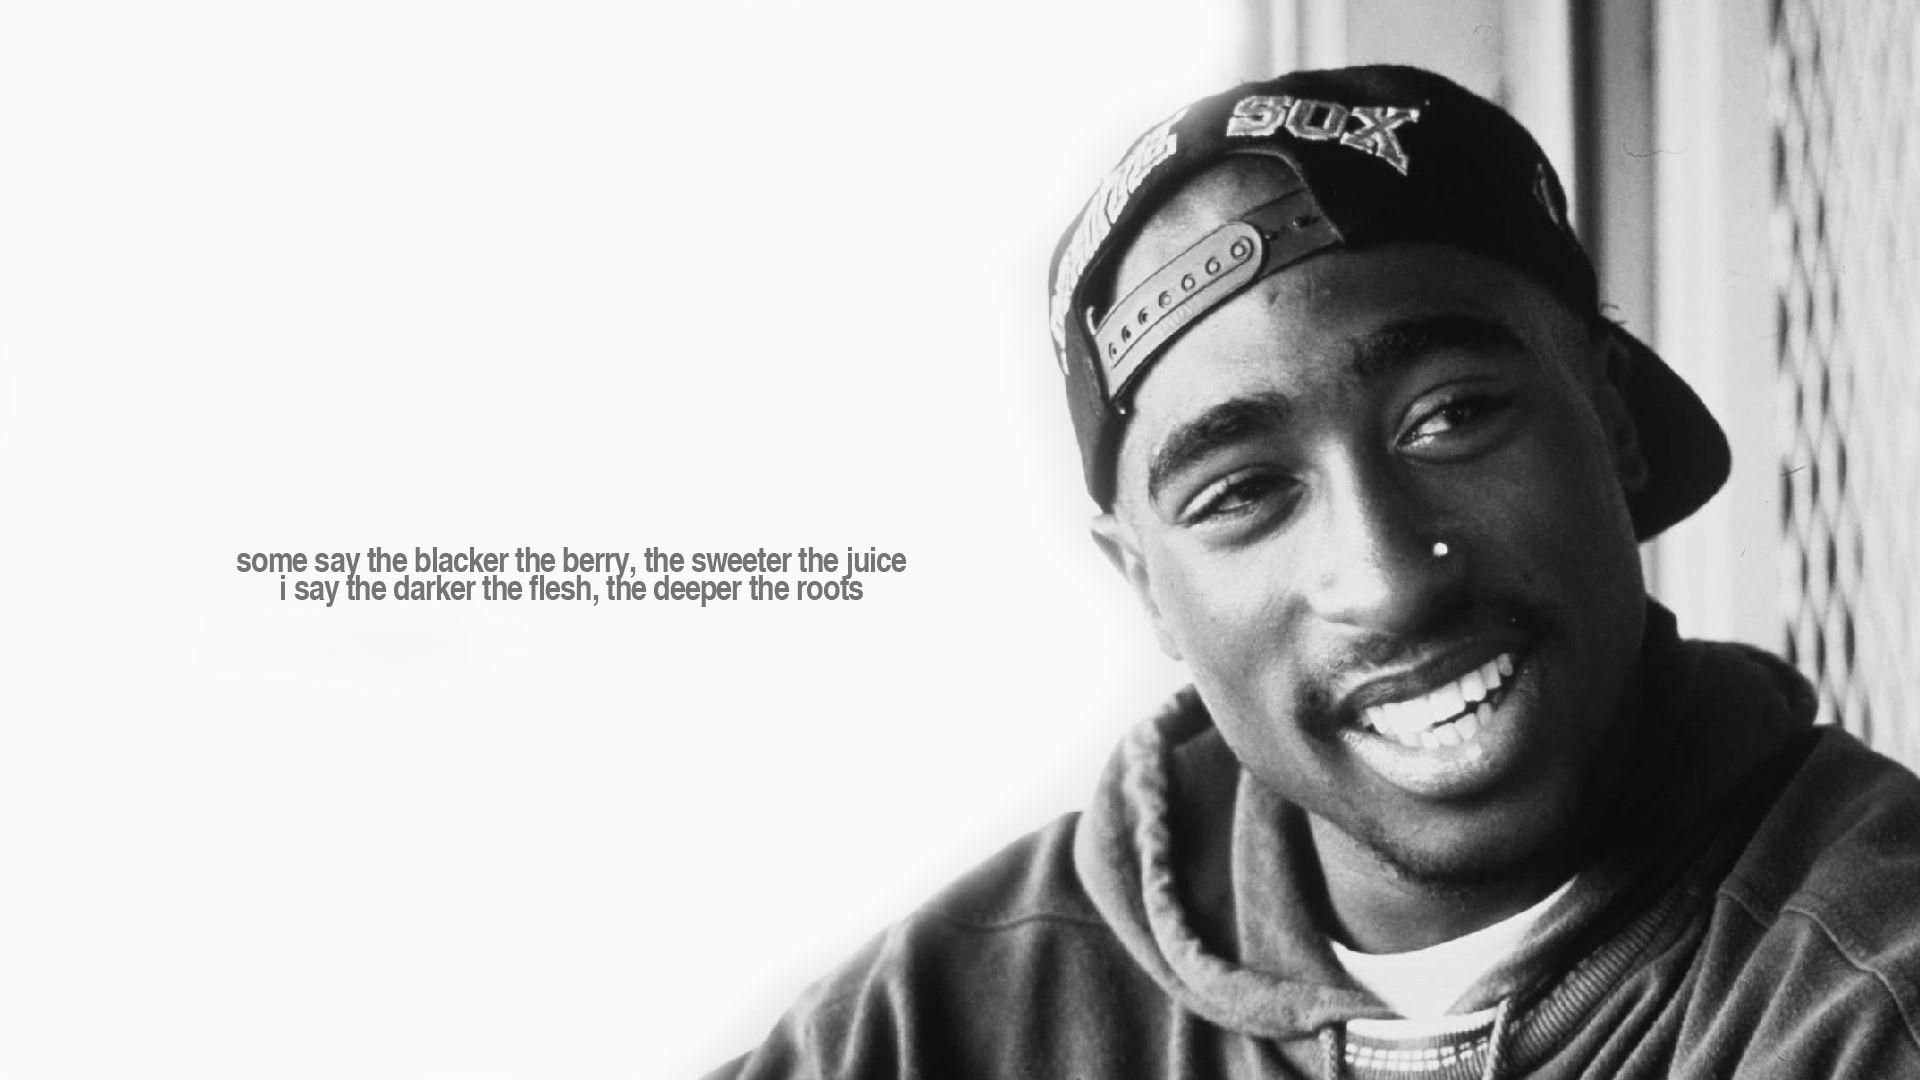 Quotes 2pac Wallpaper 1920x1080 Quotes, 2pac, Tupac, Shakur. Love